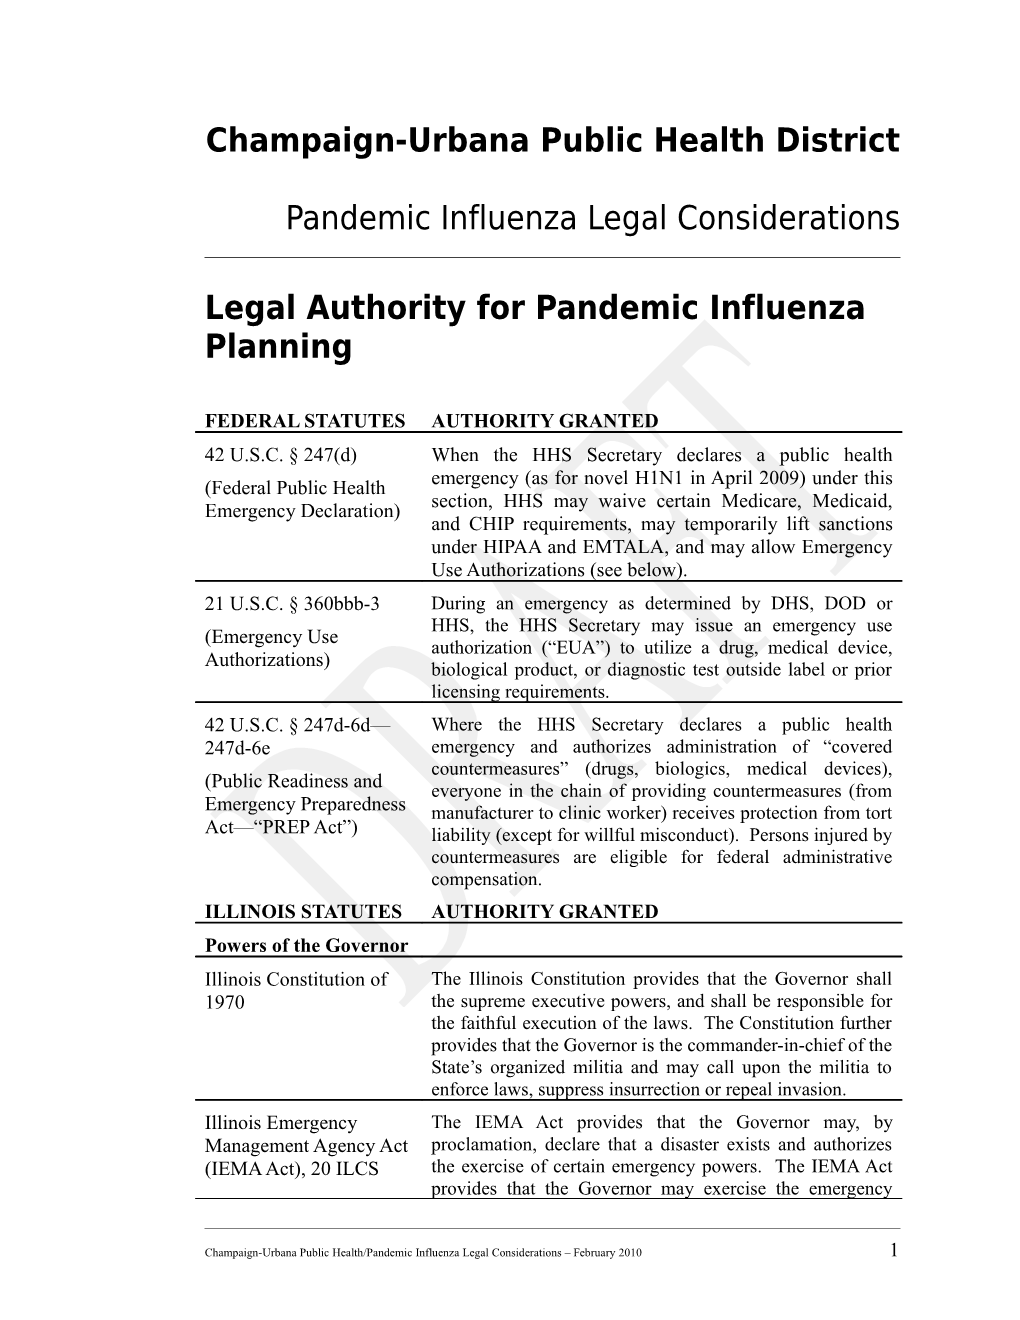 Legal Authority for Pandemic Influenza Planning